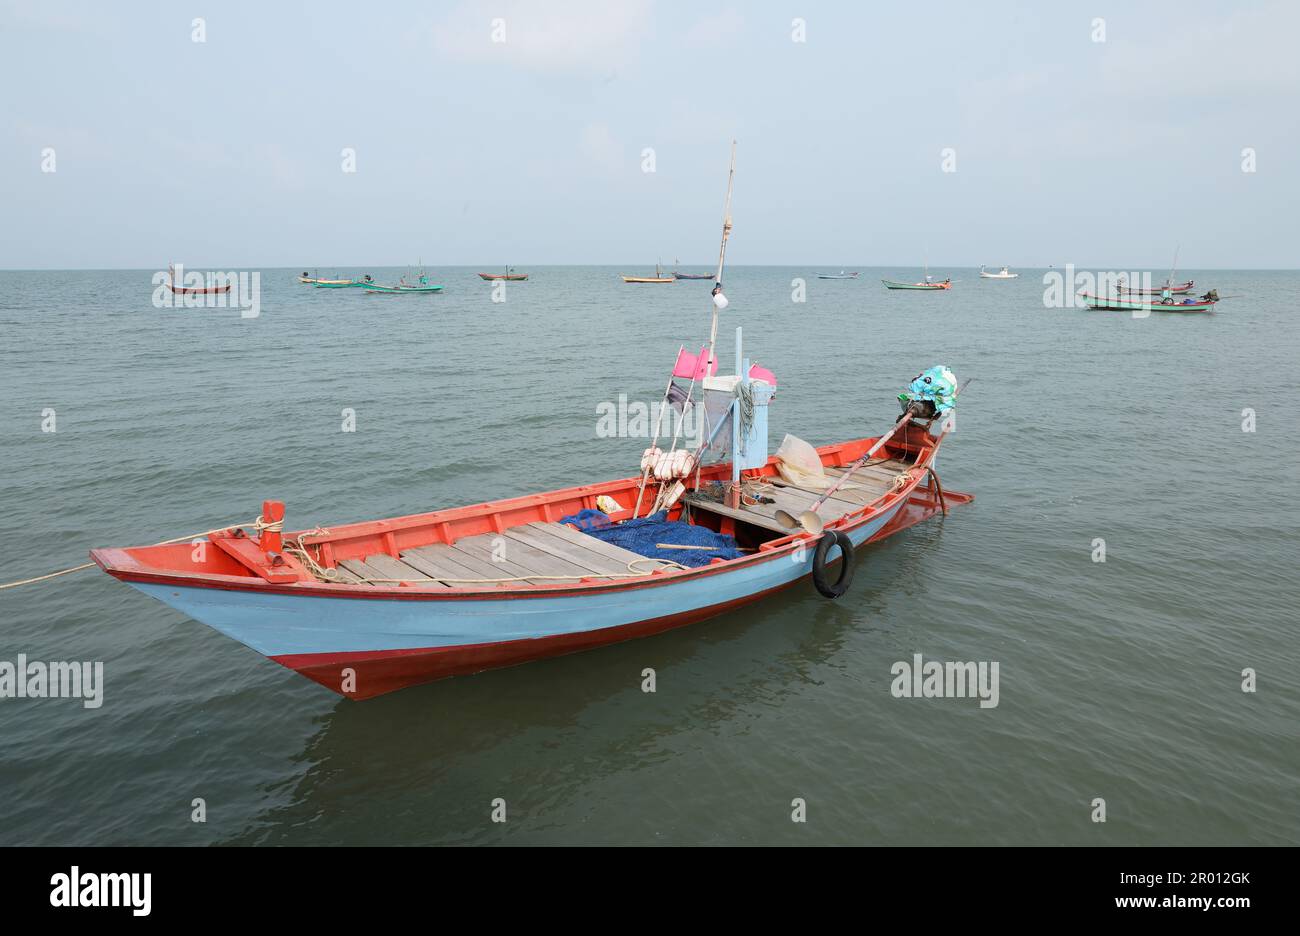 Colorful fishing boat floating on the sea. Stock Photo